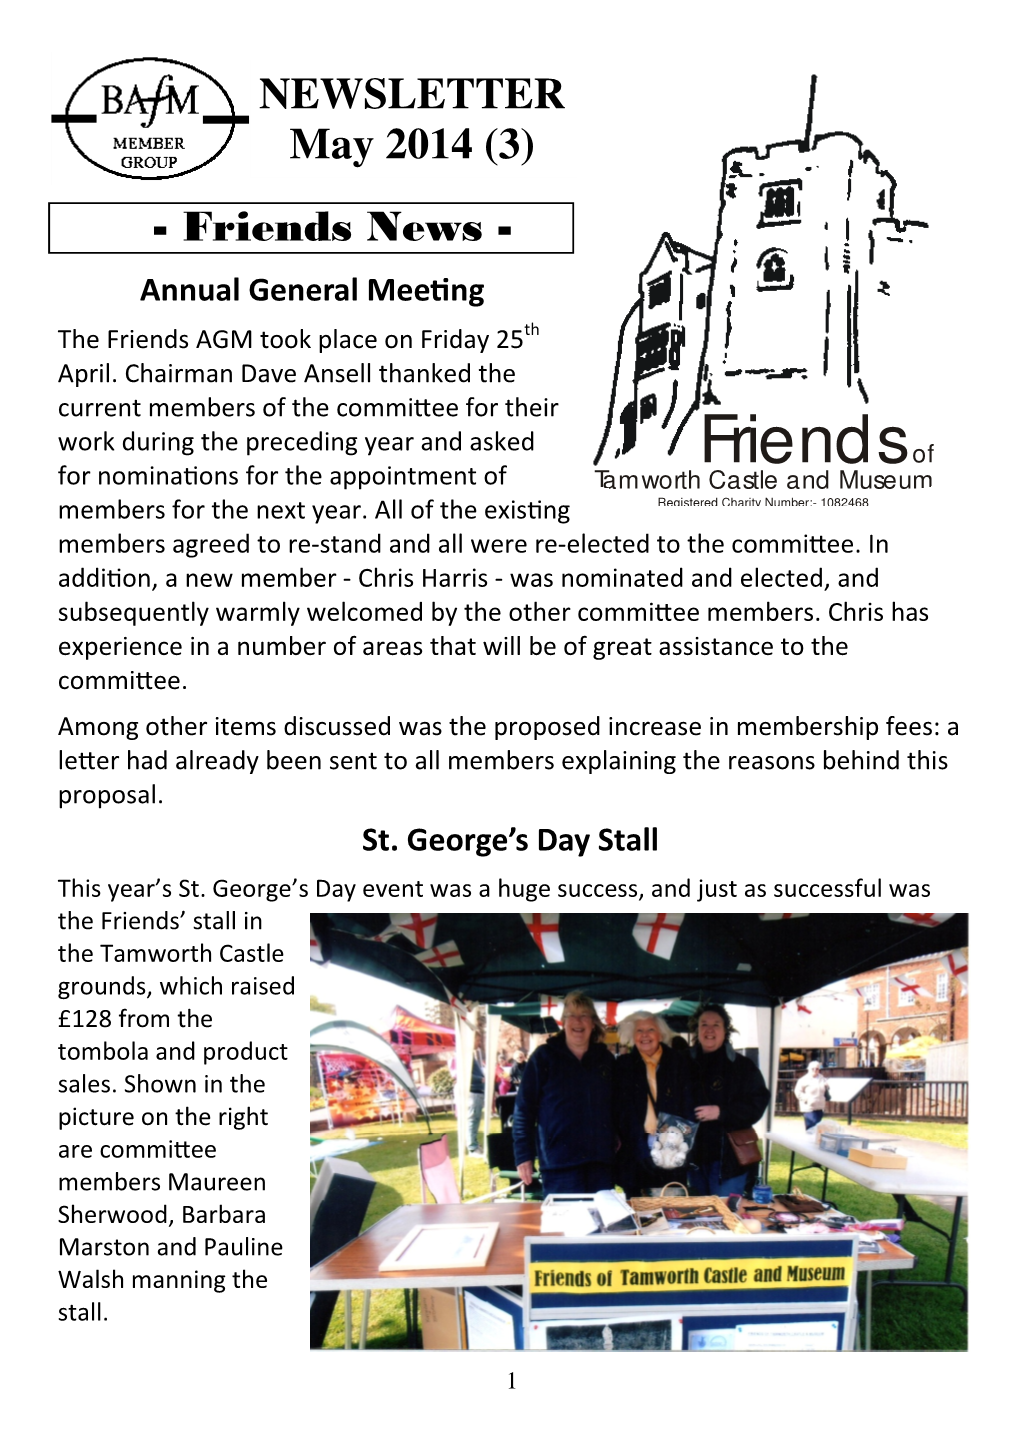 Newsletter 3, May 2014